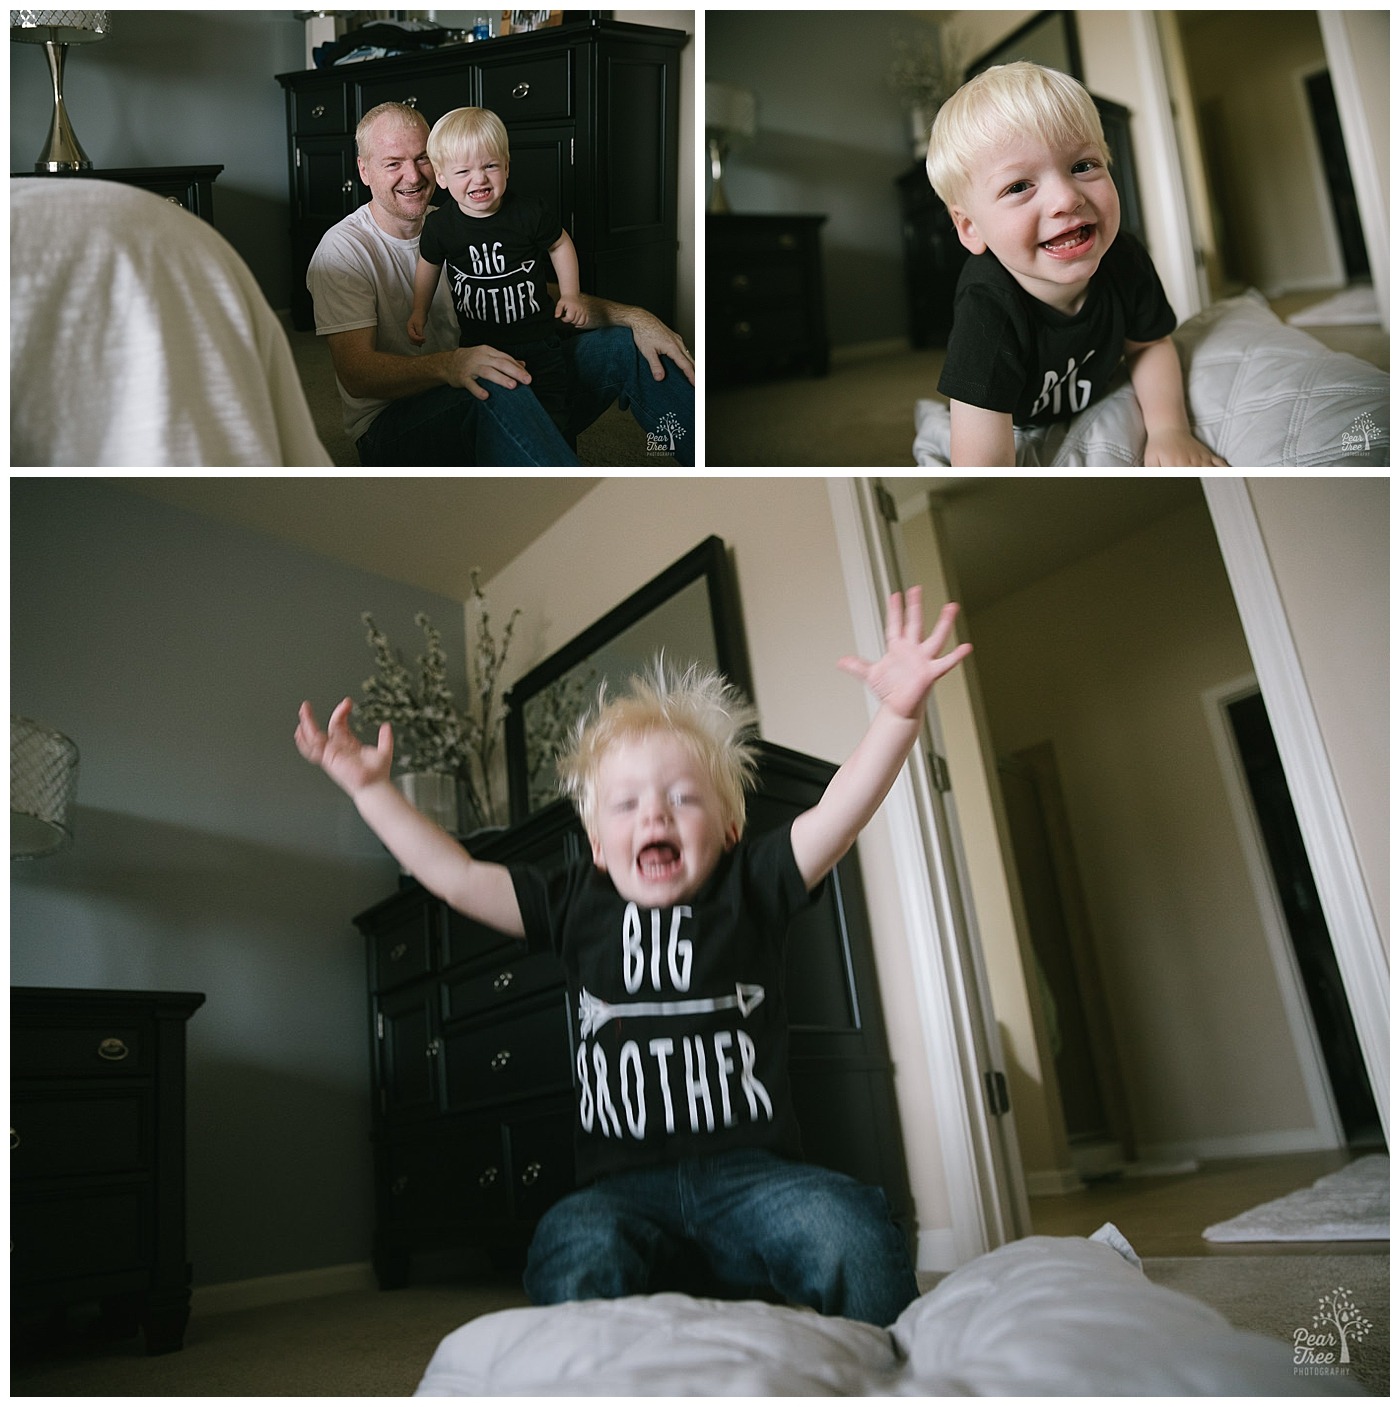 Big brother toddler being silly, jumping and smiling